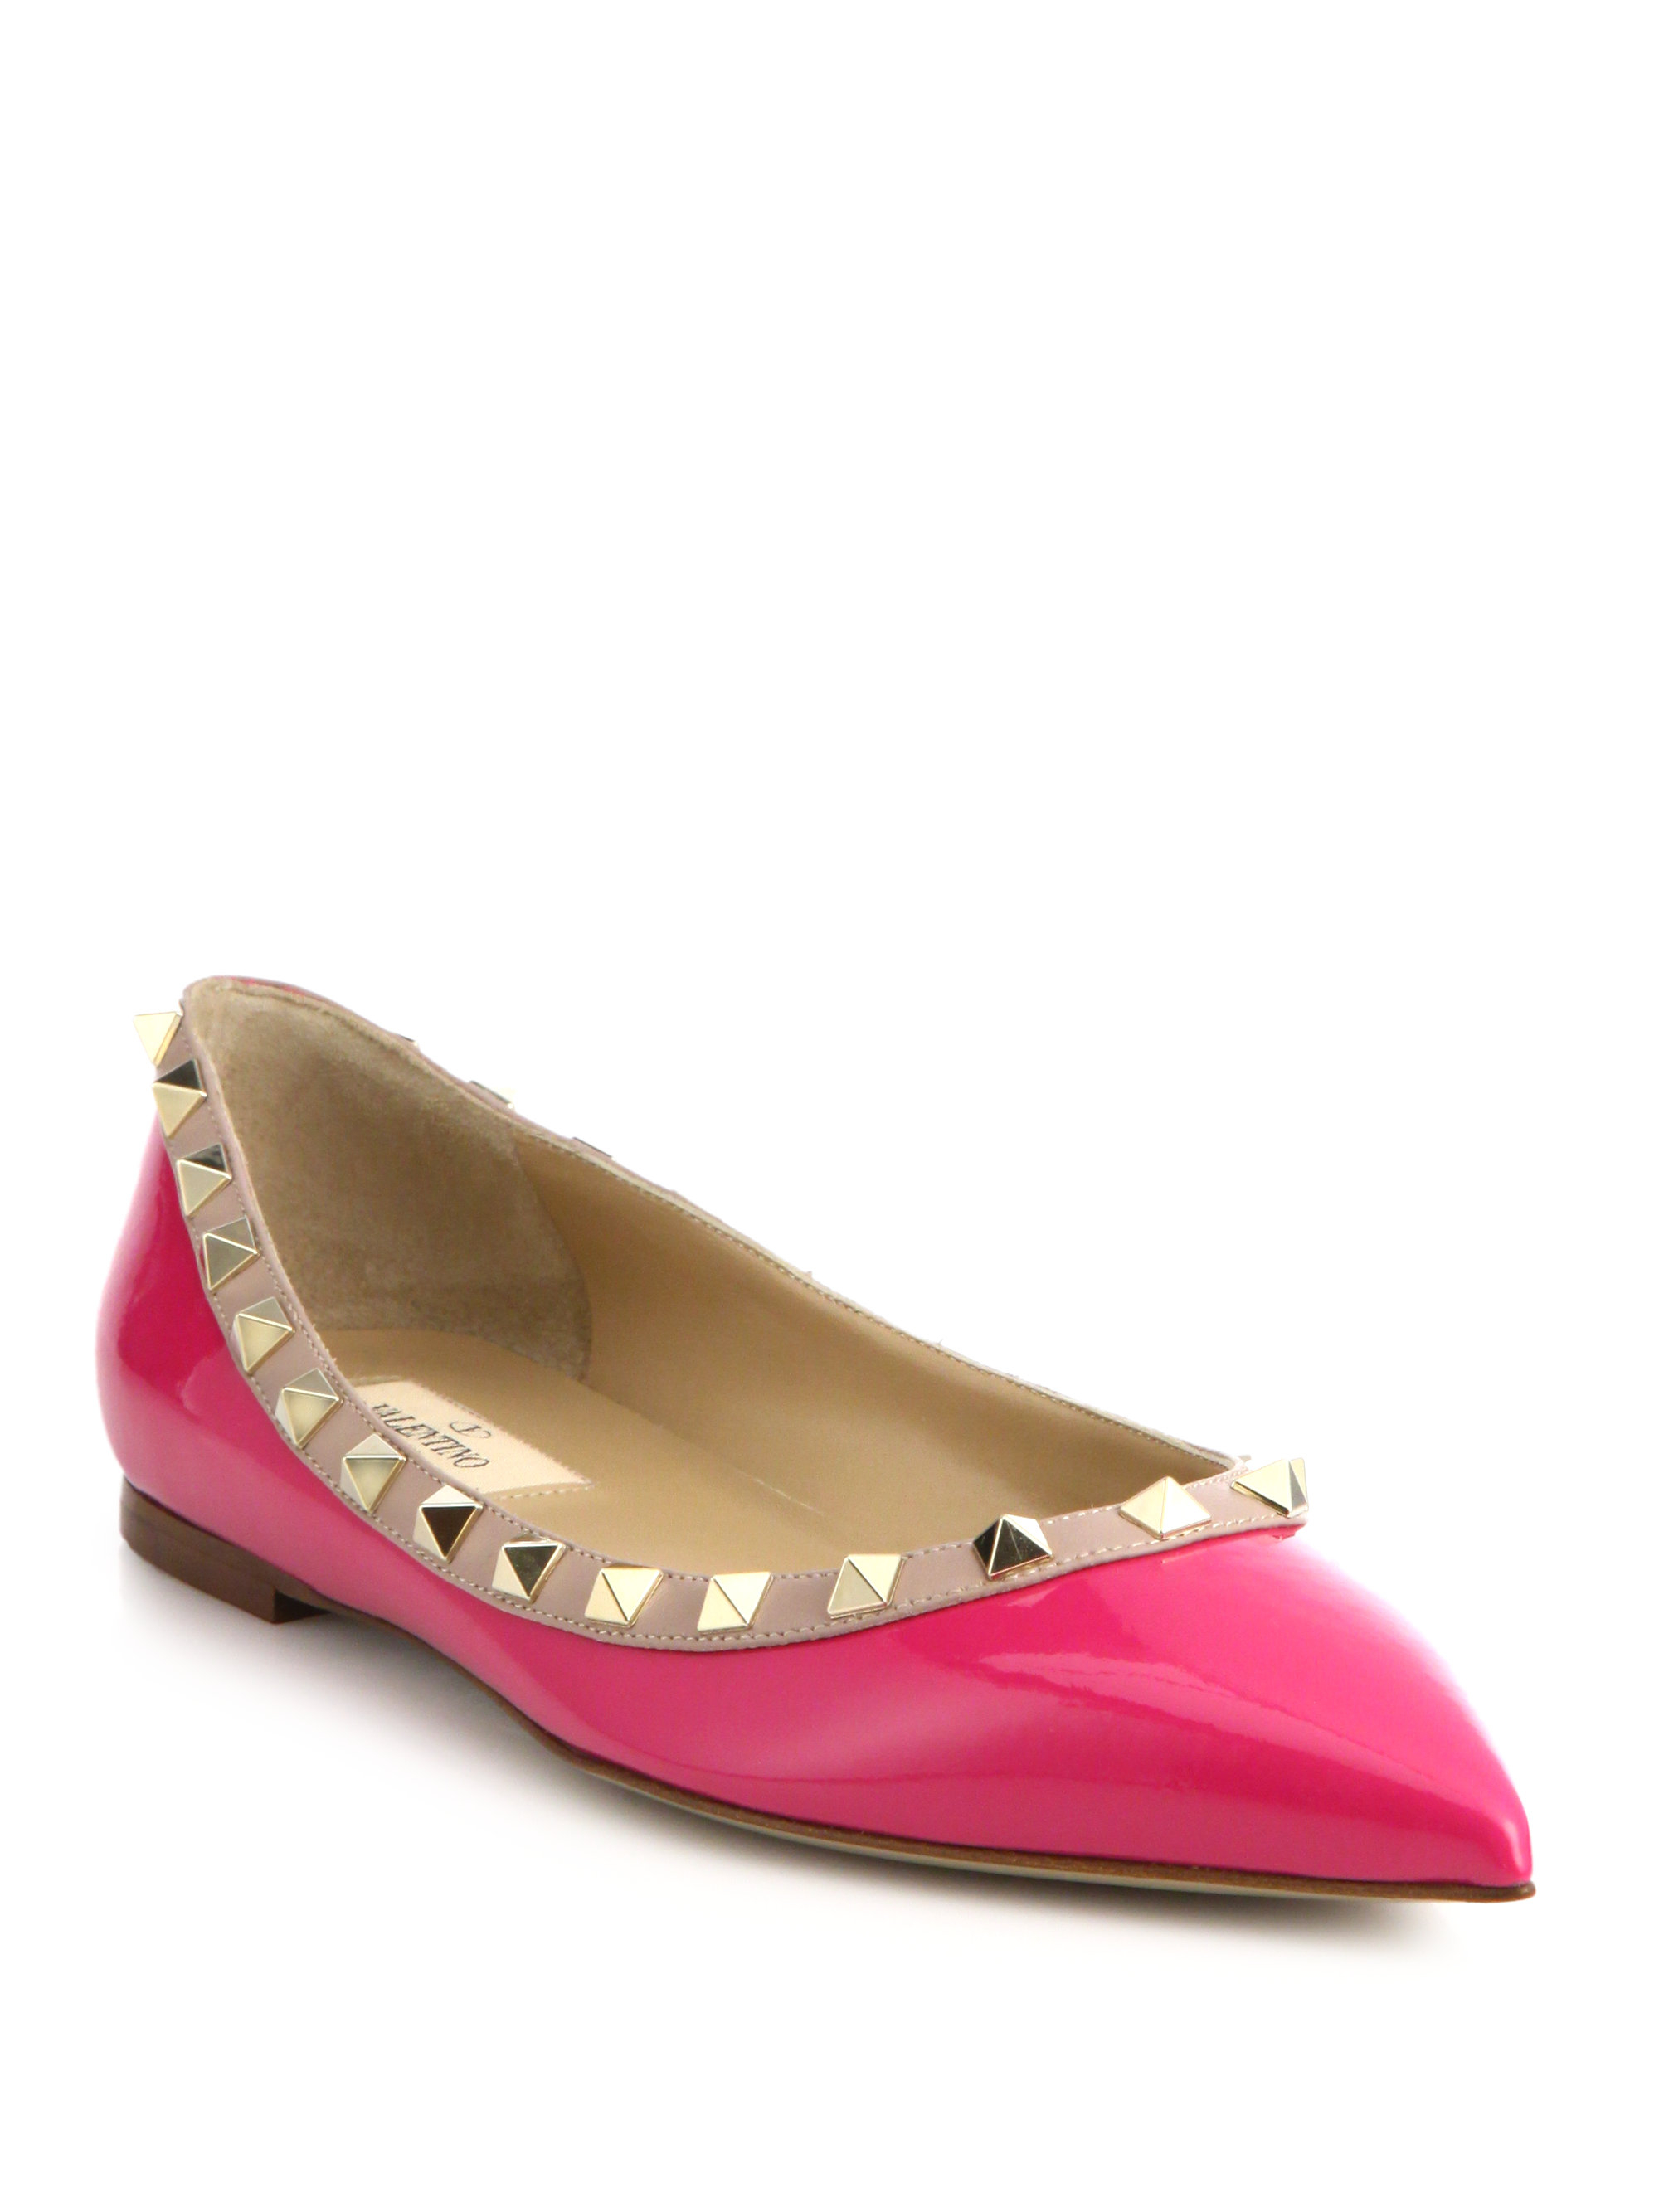 Lyst - Valentino Rockstud Leather & Patent Leather Flats in Pink